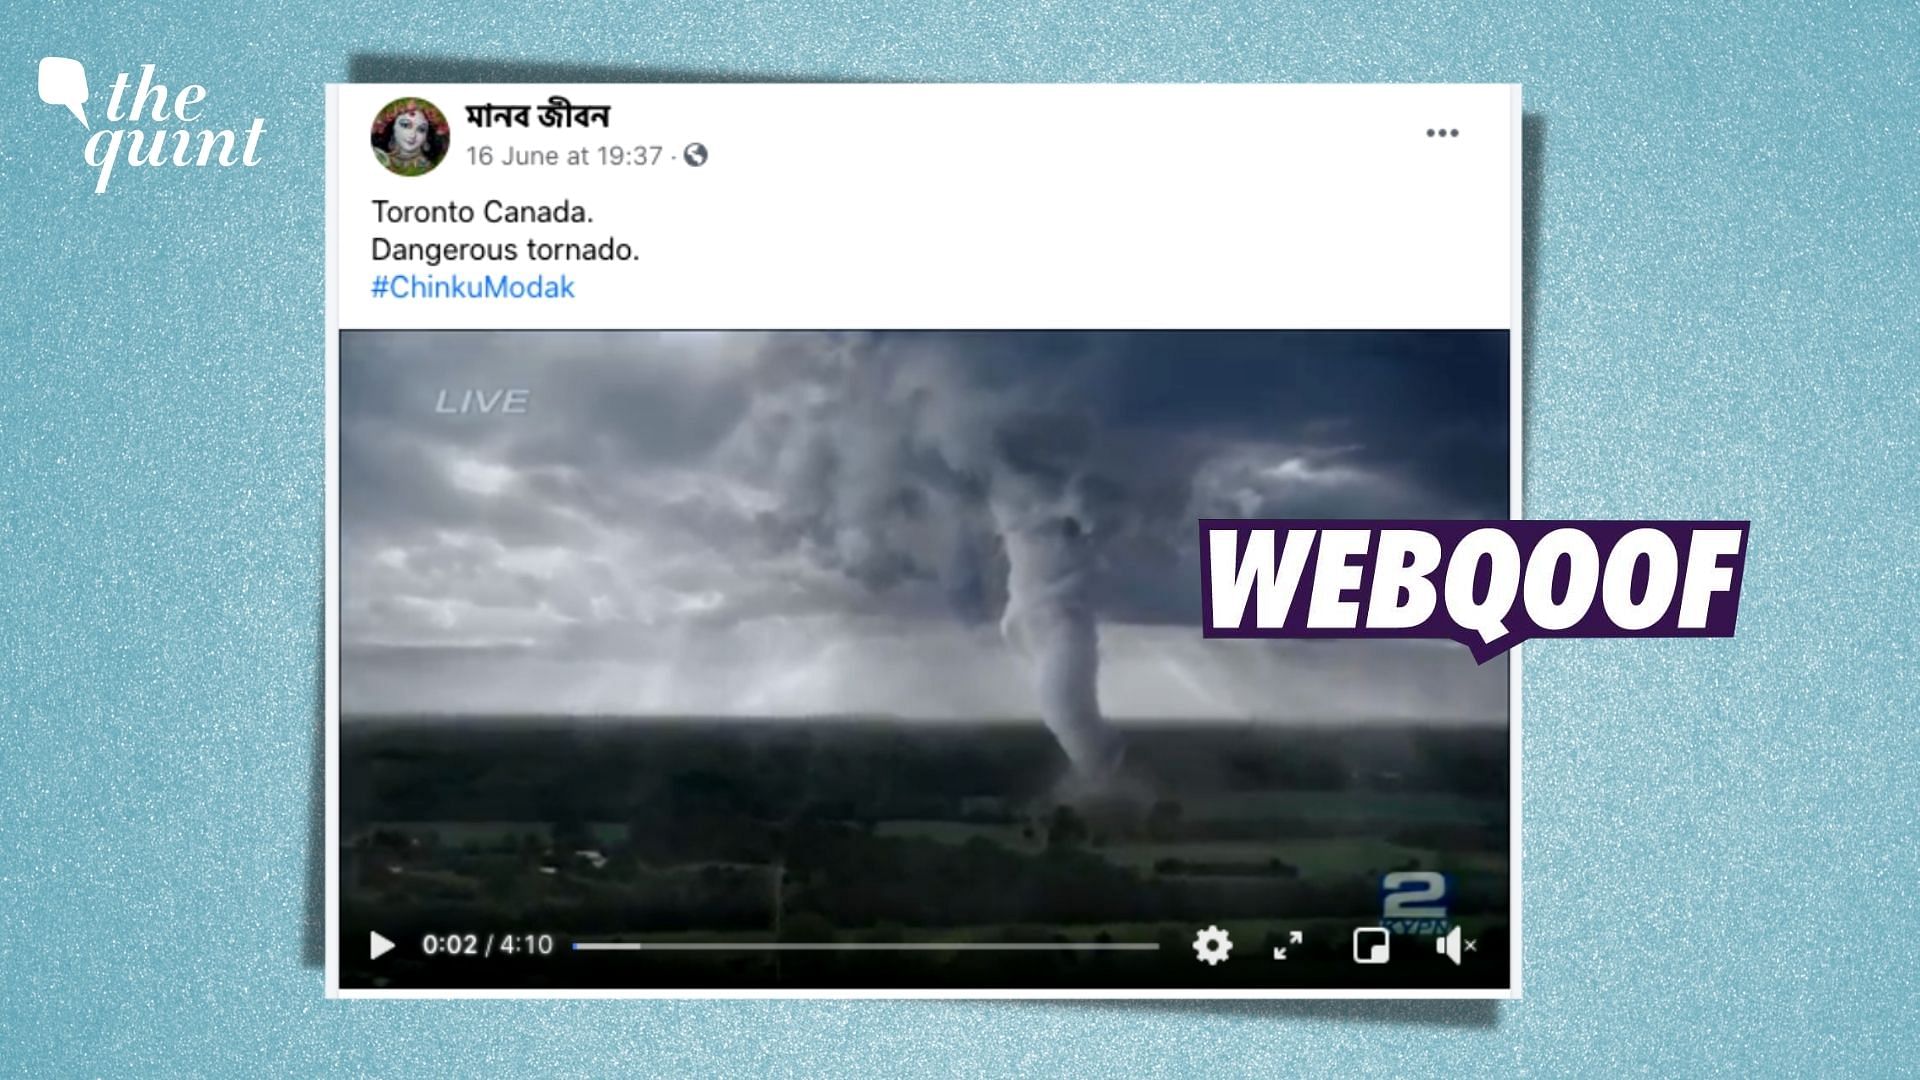 Clip from a 2014 film, ‘Into the Storm’ is being widely shared on social media with a claim that it shows a tornado which recently struck Toronto in Canada.